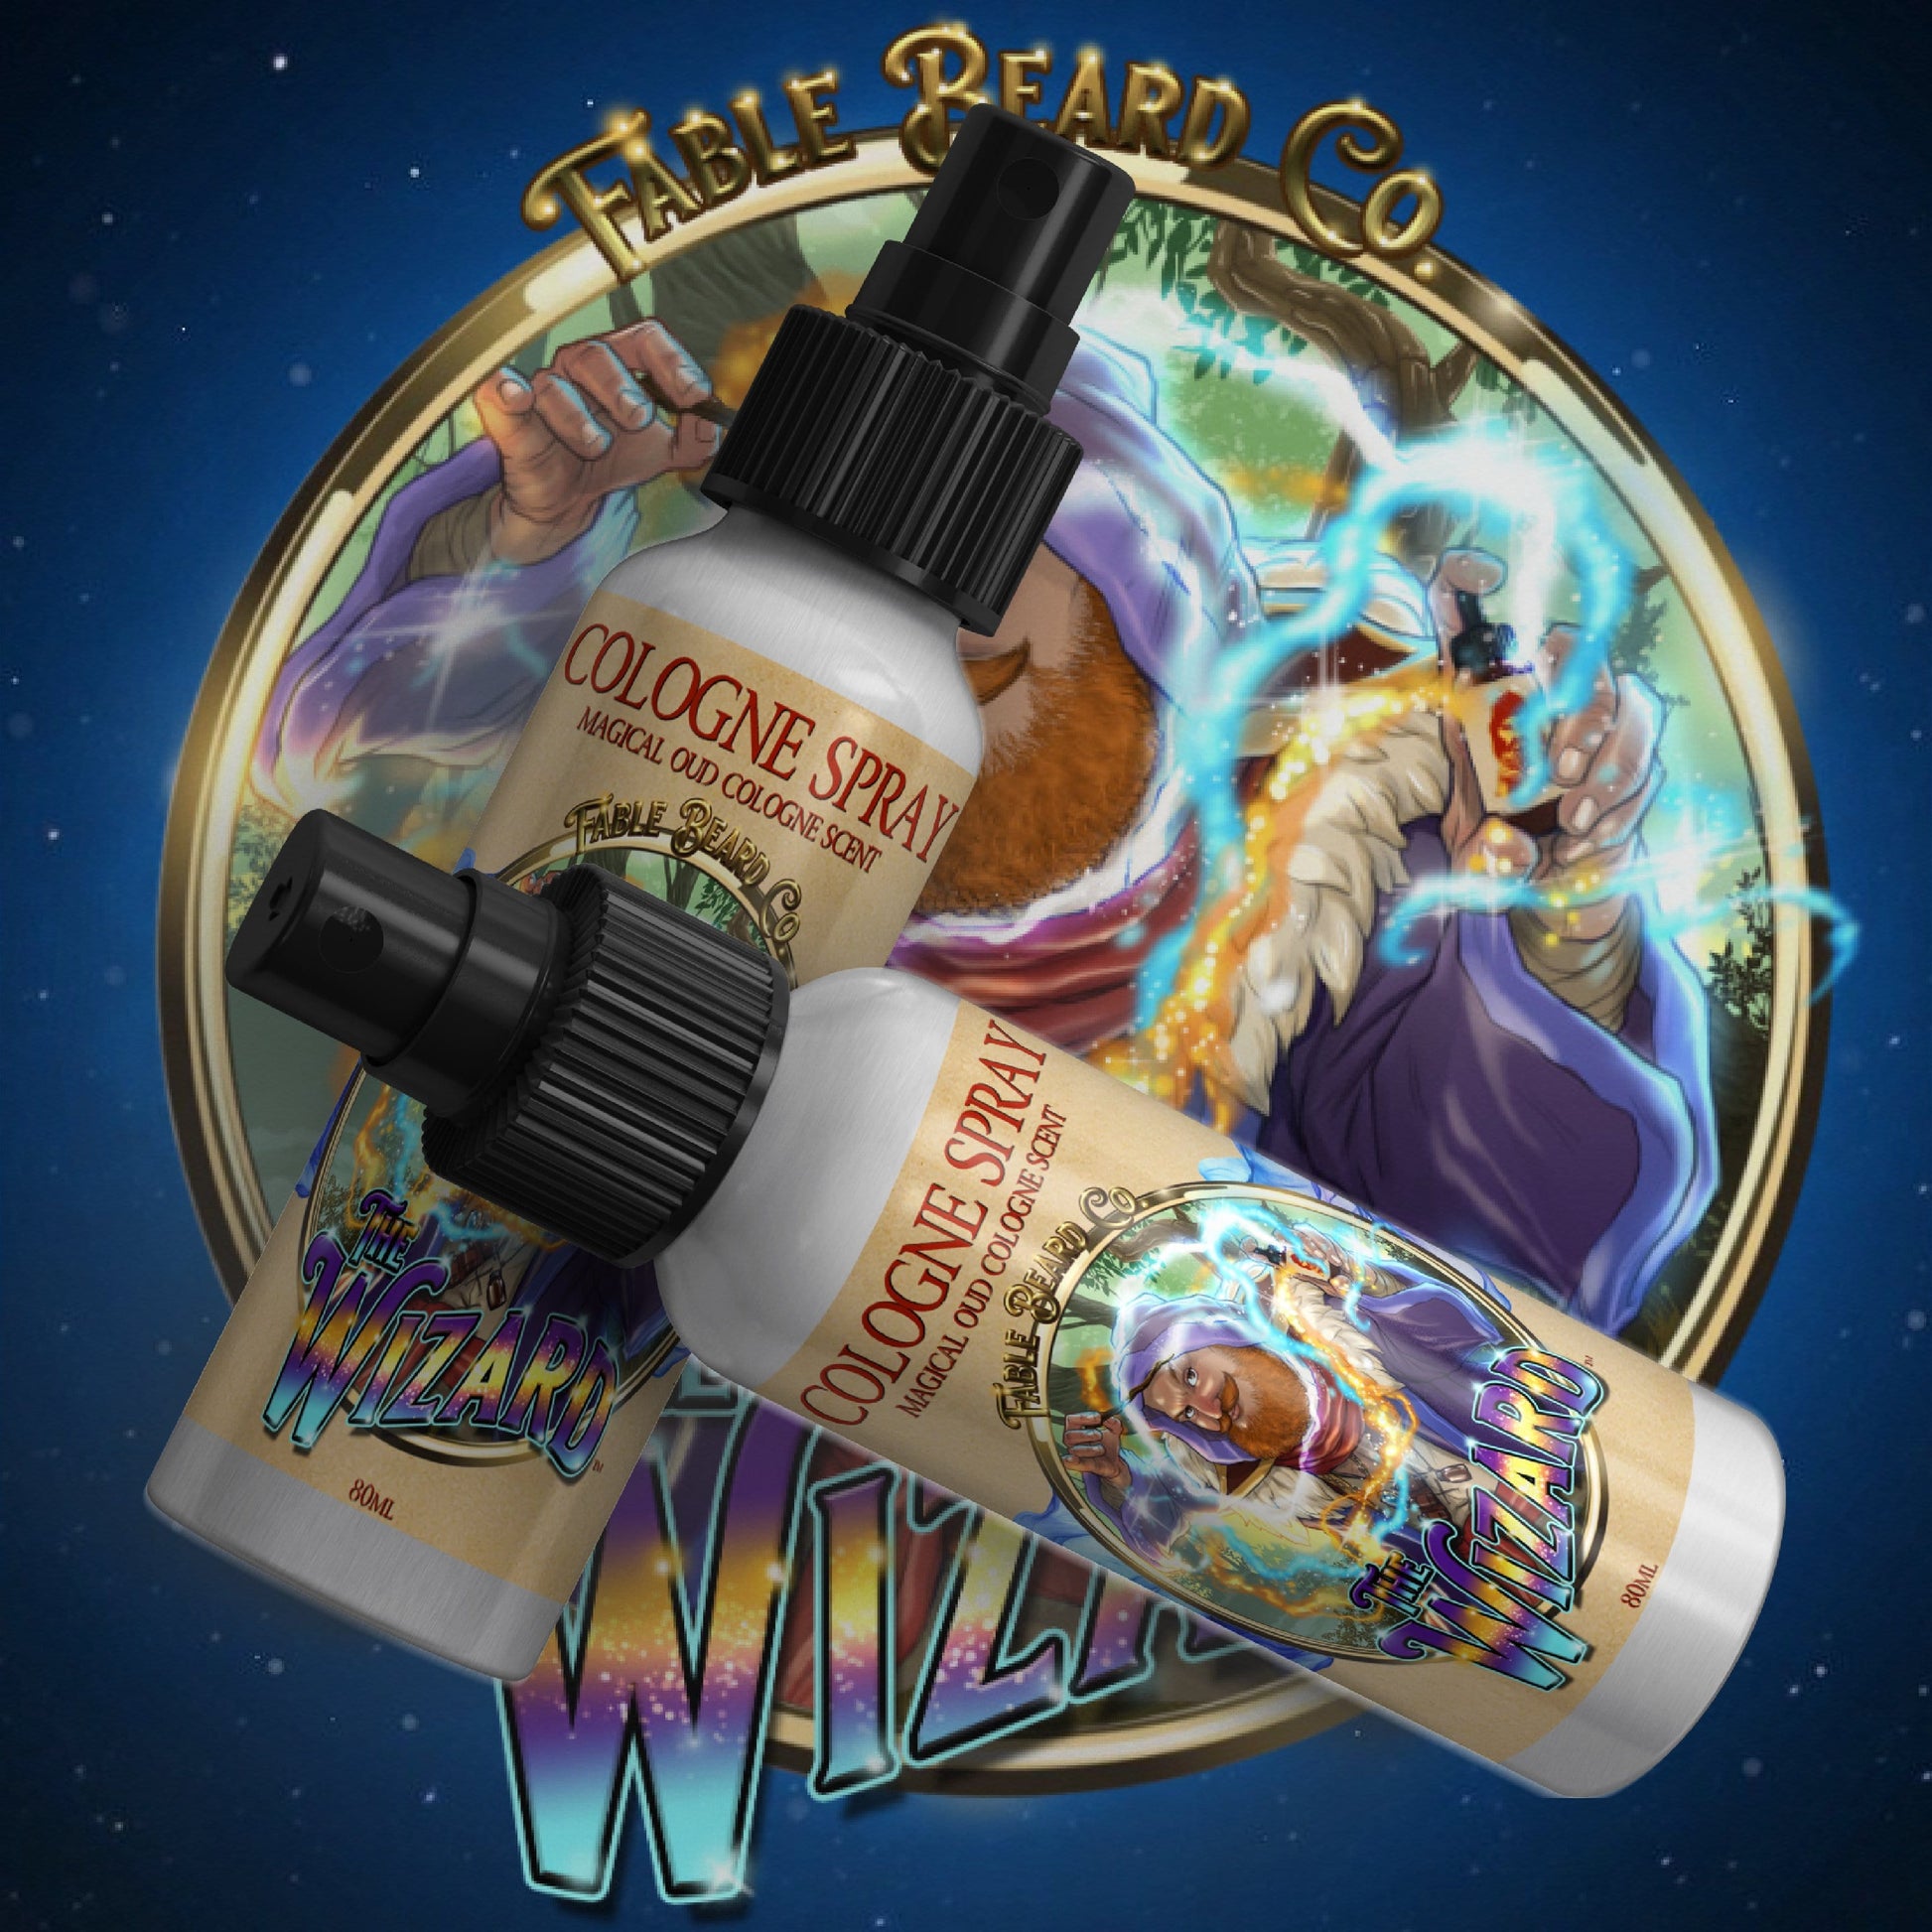 The Wizard - Magical Oud Cologne Beard Butter – Fable Beard Co.